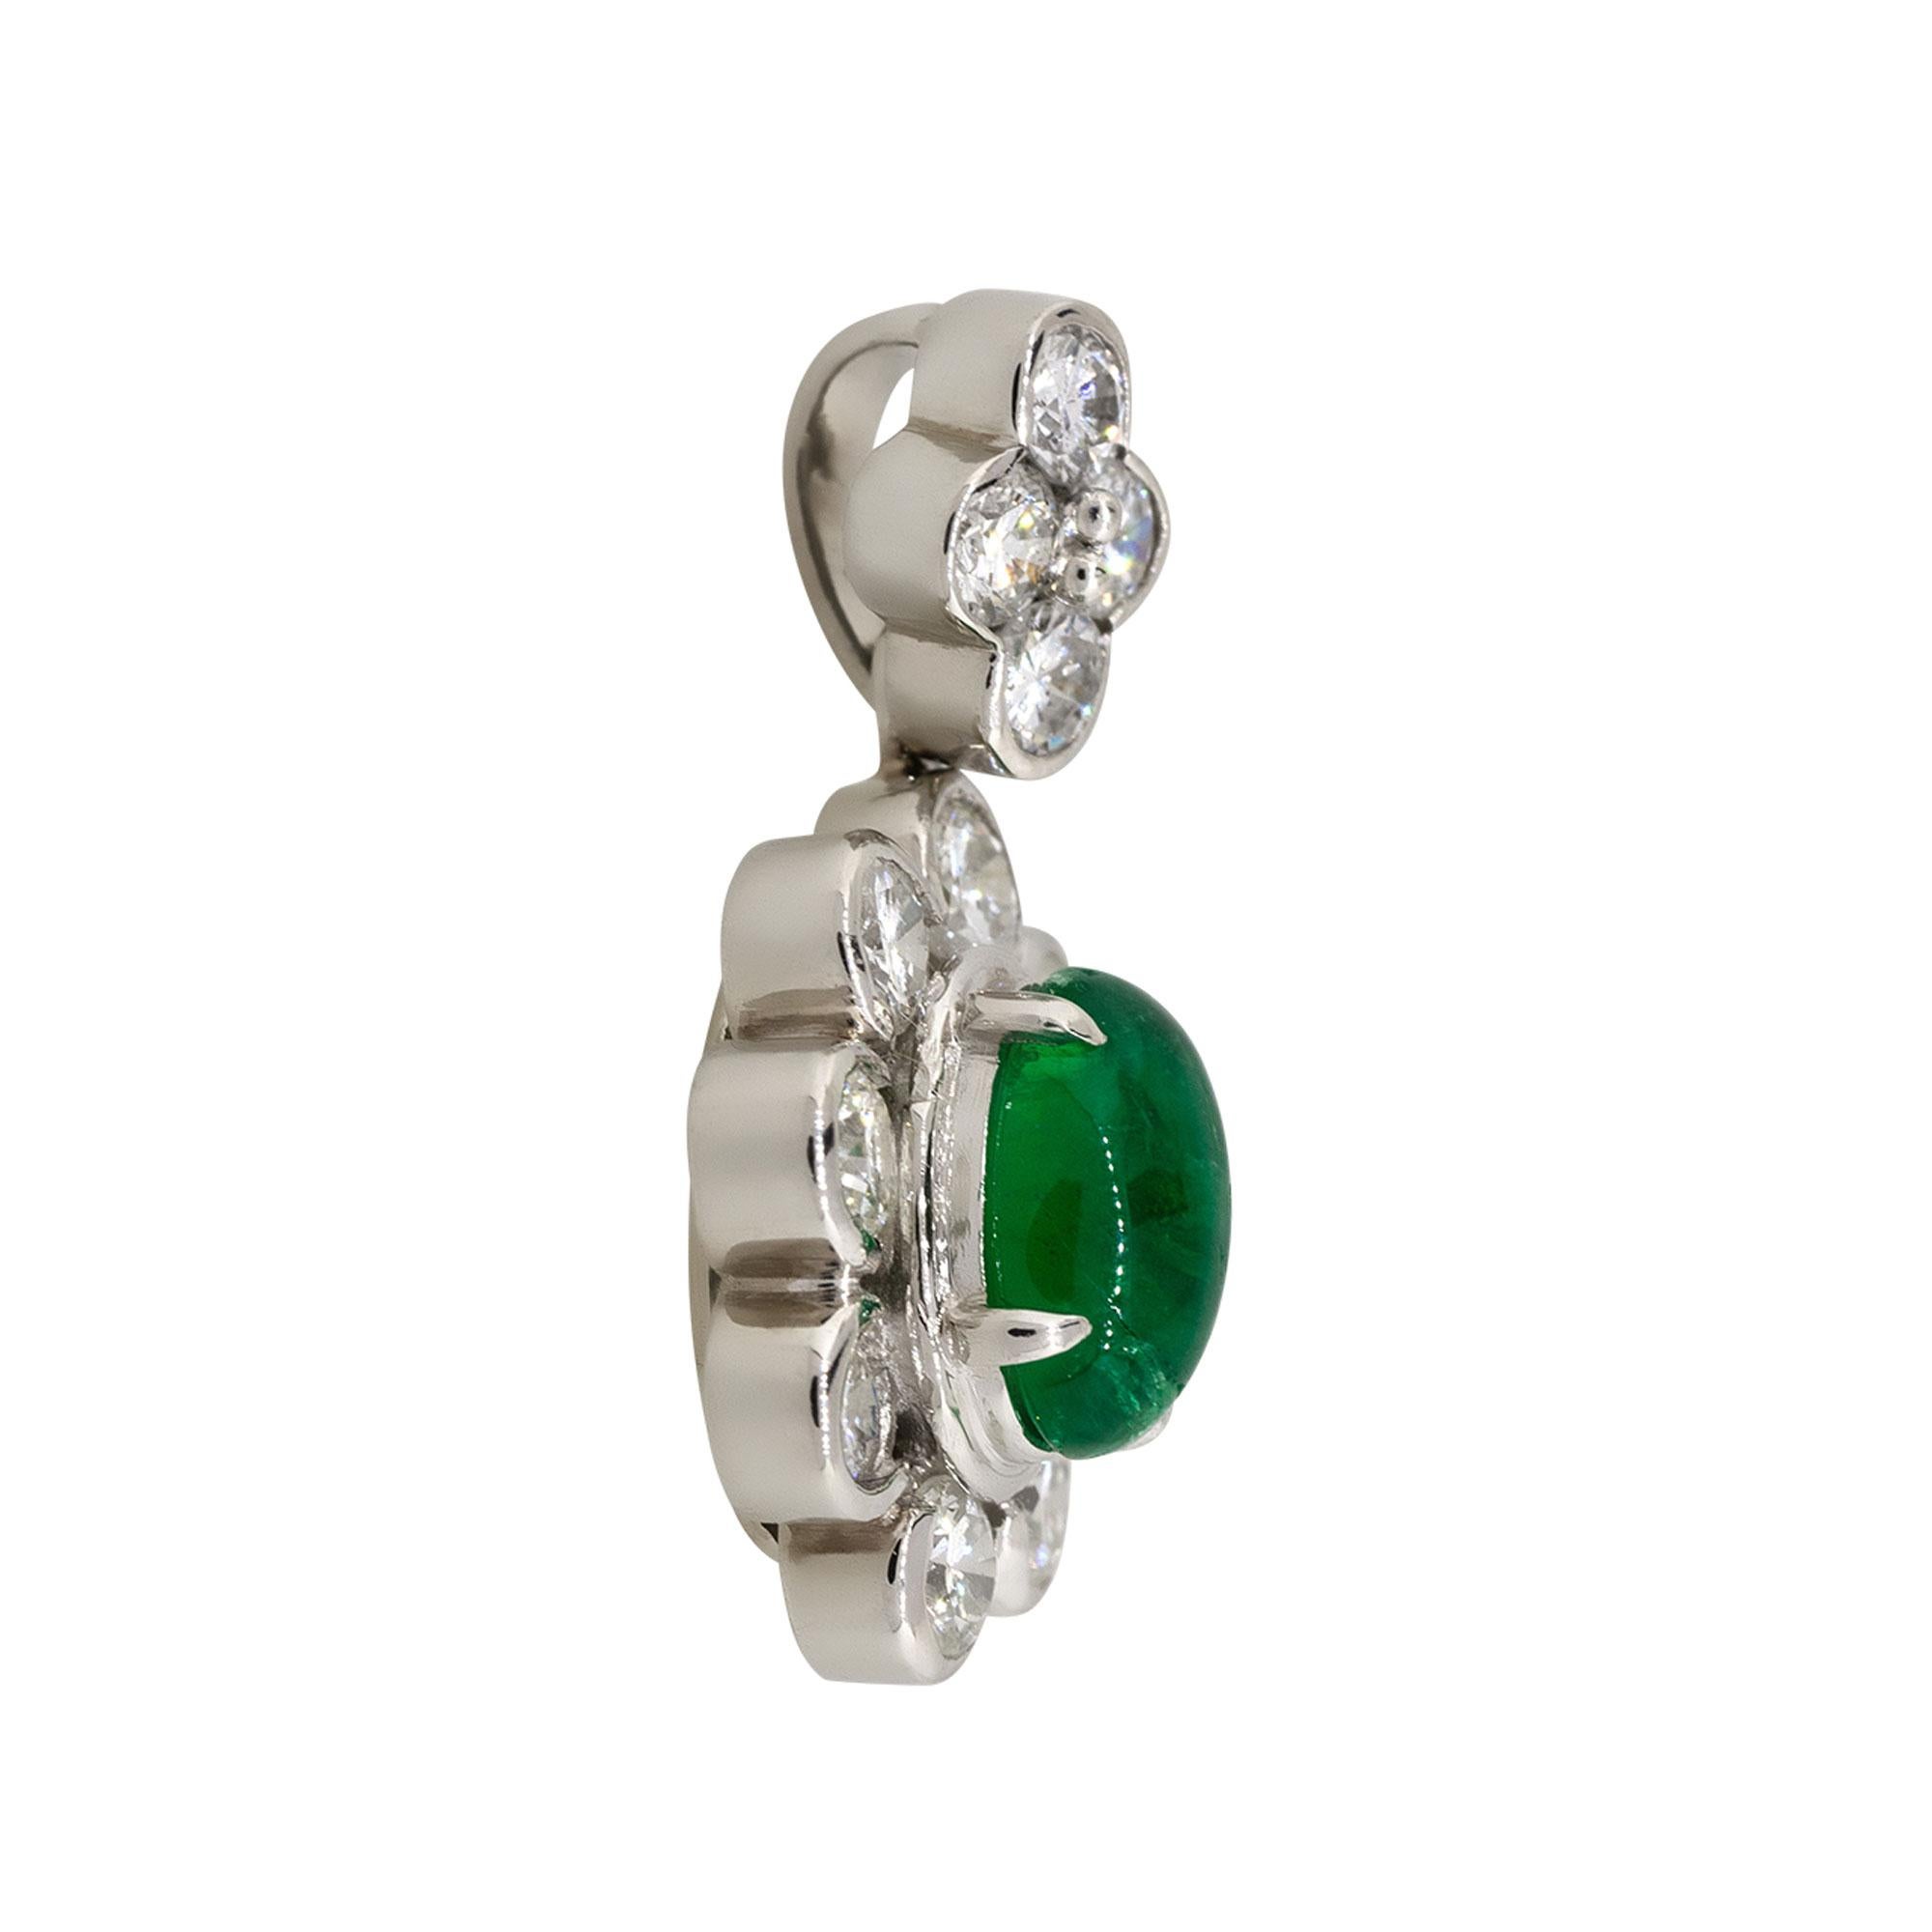 Material: 18k white gold
Diamond Details: Approx. 1.14ctw of round cut Diamonds. Diamonds are G/H in color and VS in clarity
Gemstone Details: Approx. 1.14ctw of Emerald cabochon gemstones
Pendant Measurements: 12.7mm x 7.7mm x 24mm
Total Weight: